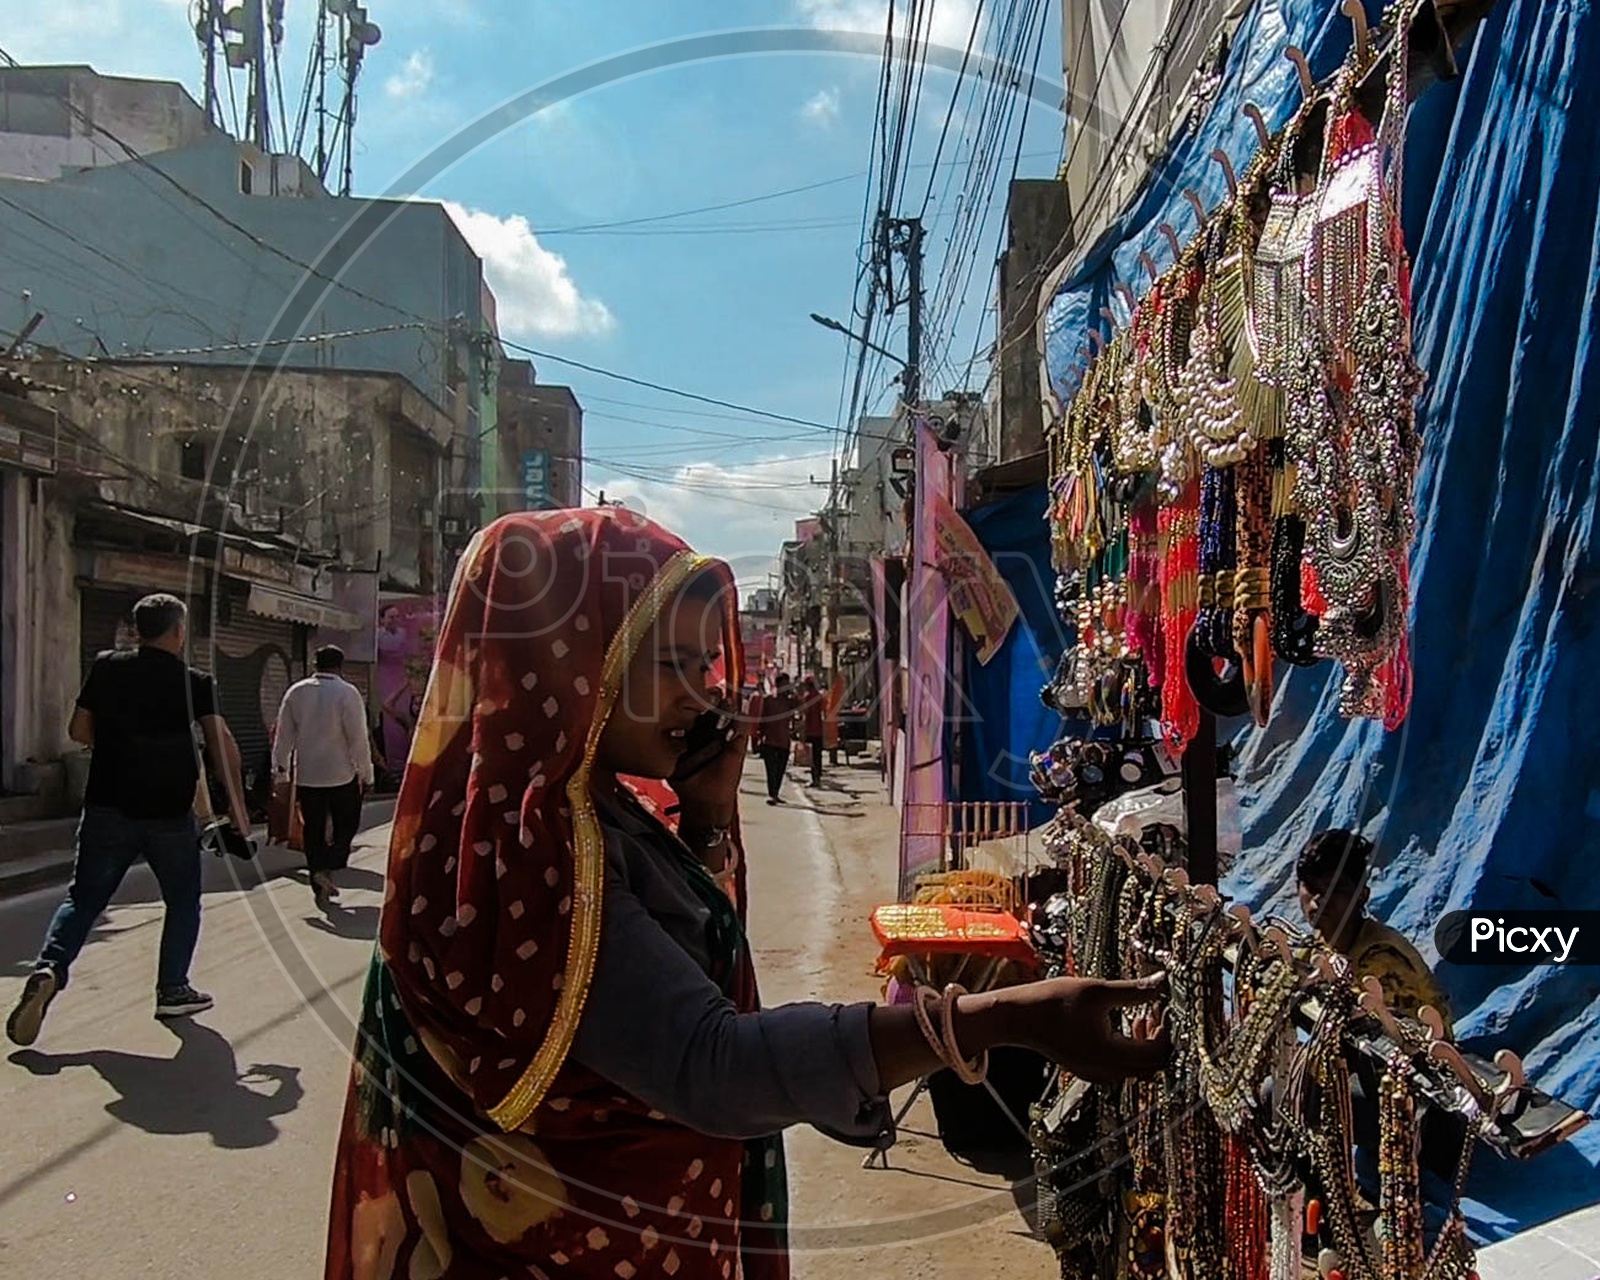 Lady purchasing jewelry from market